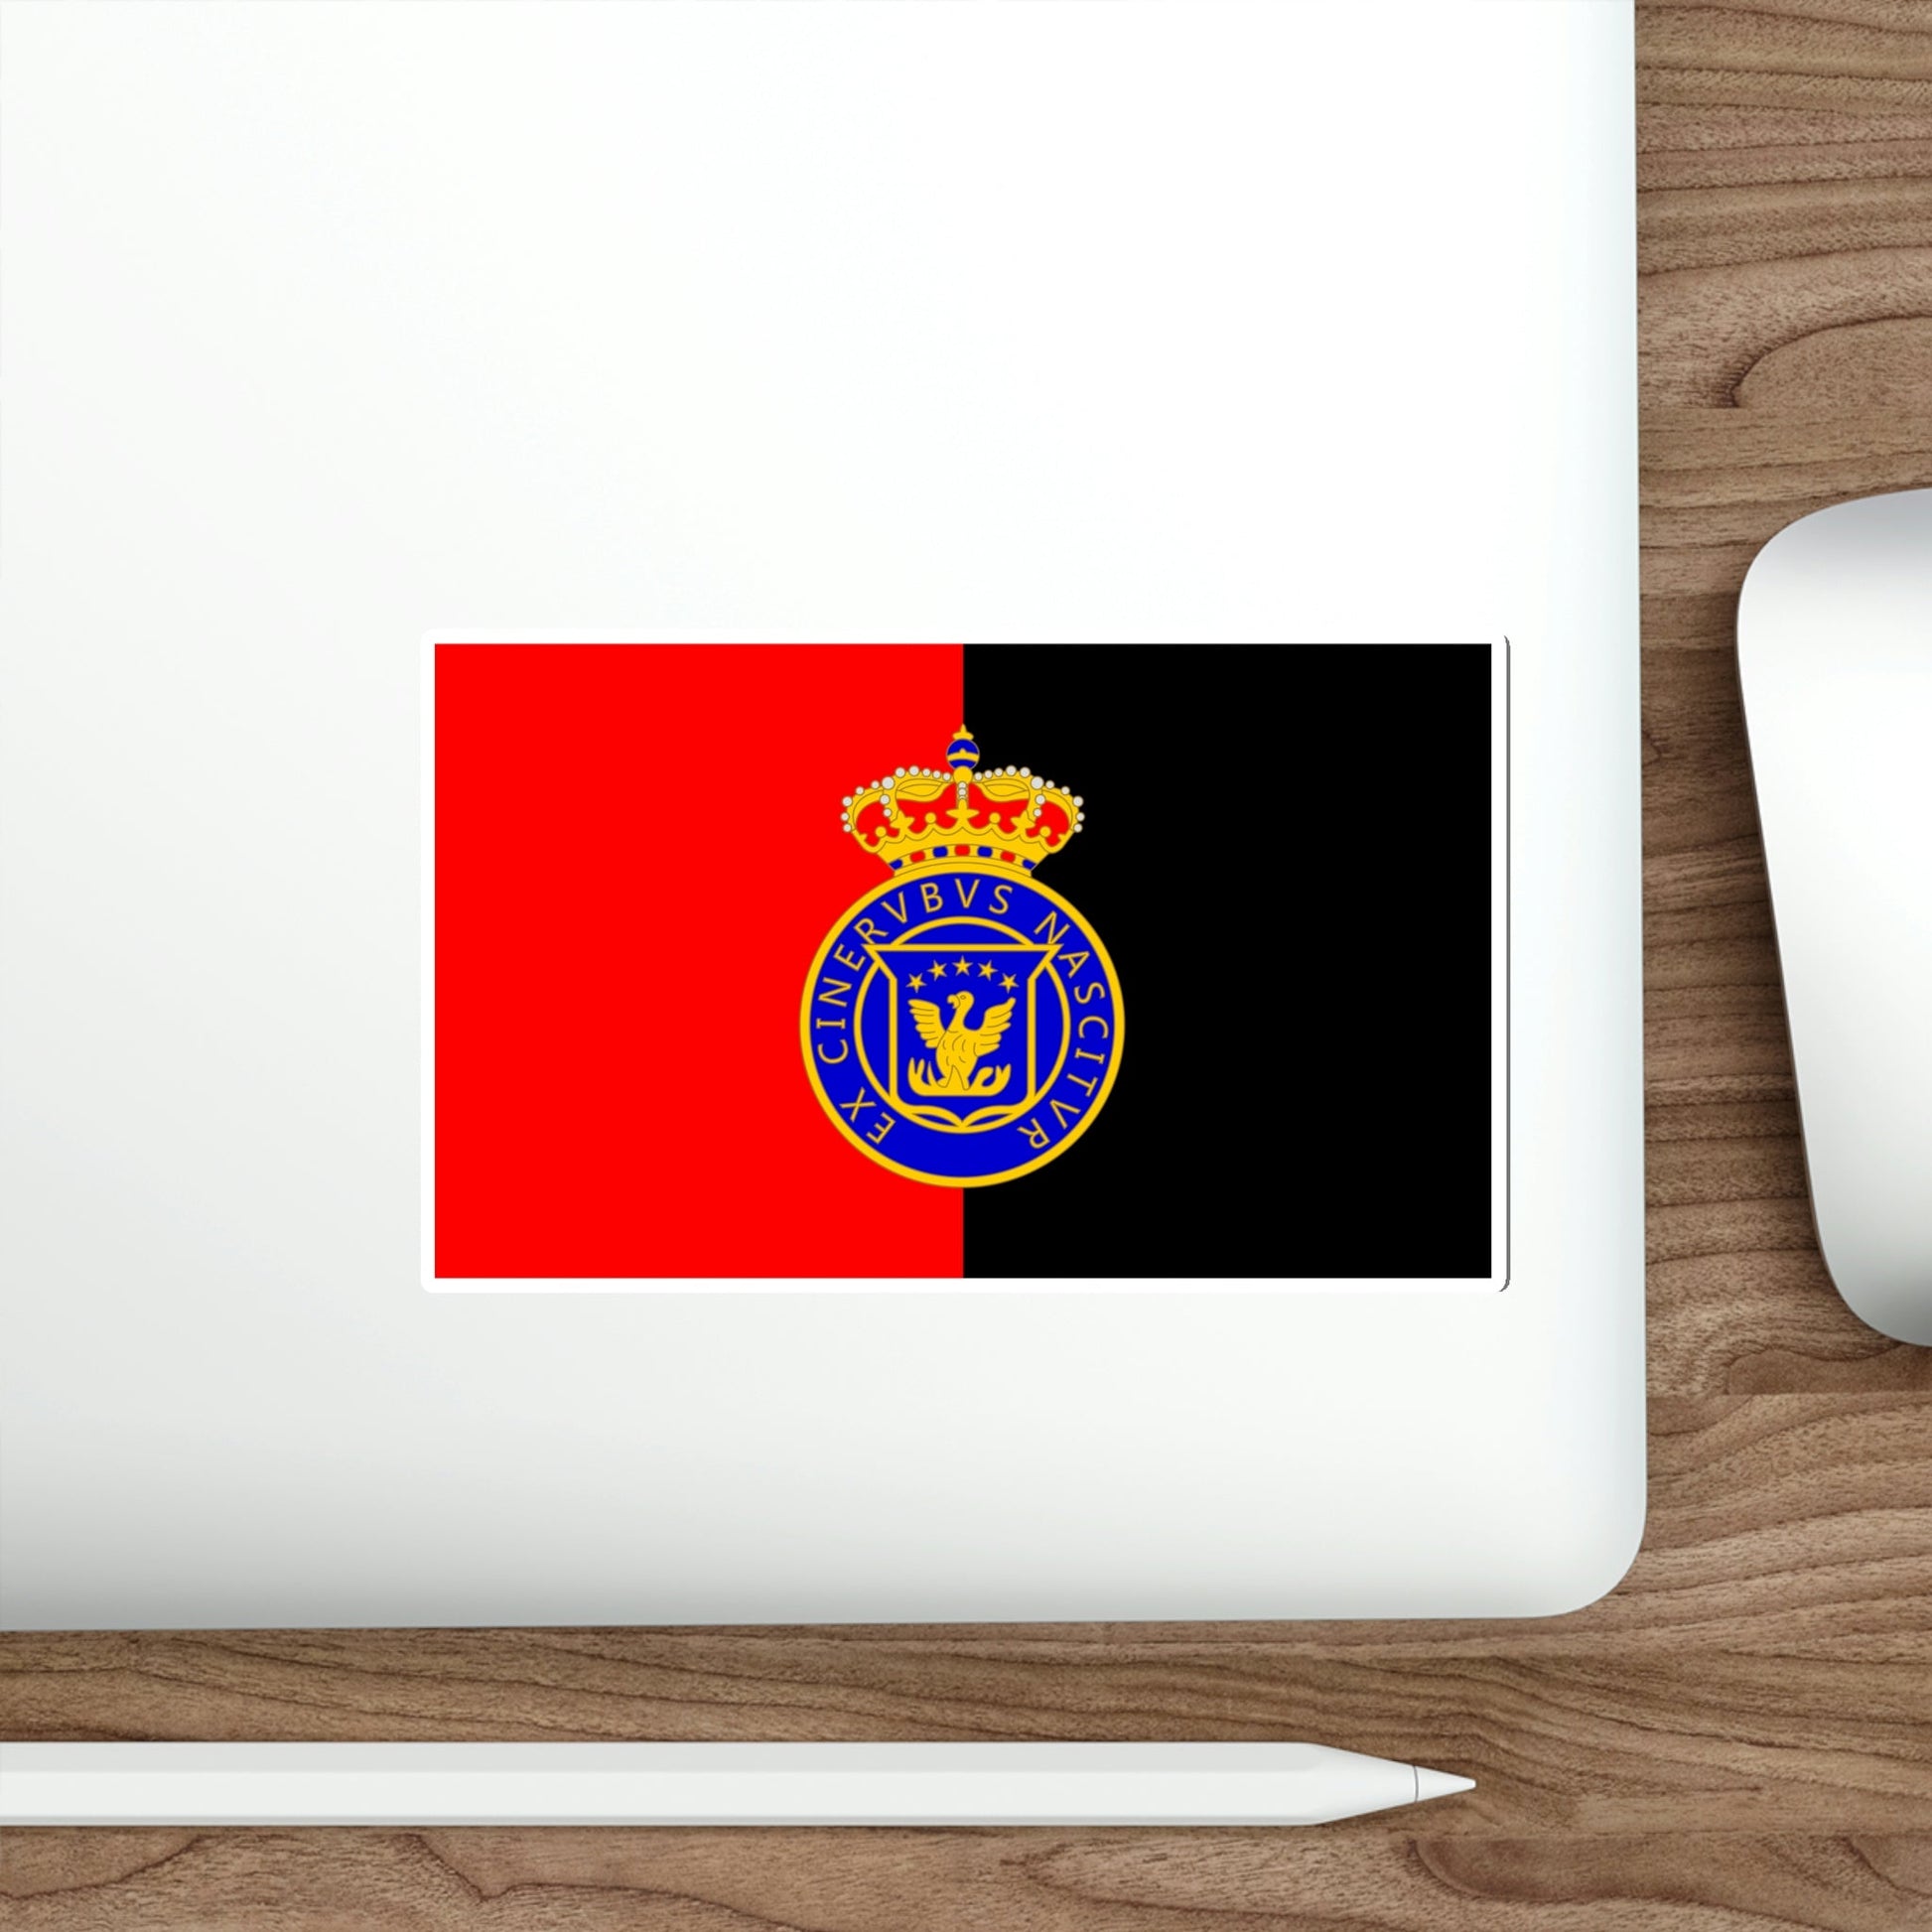 Sticker (Decal) with Flag of Haiti and USA (Haitian)